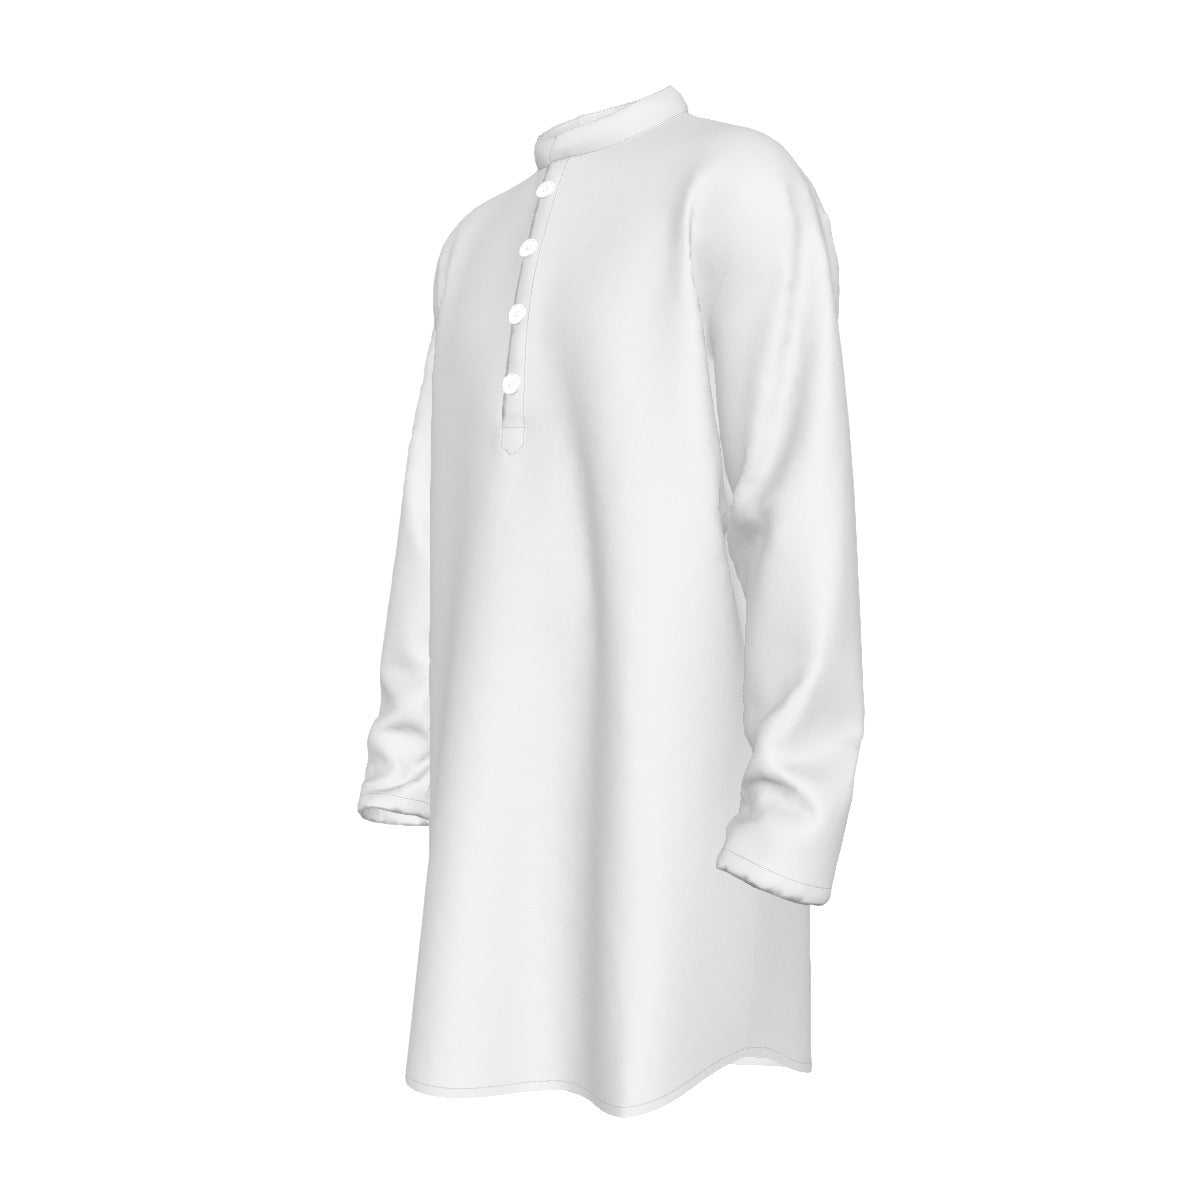 White All-Over Print Men's Stand-up Collar Long Shirt